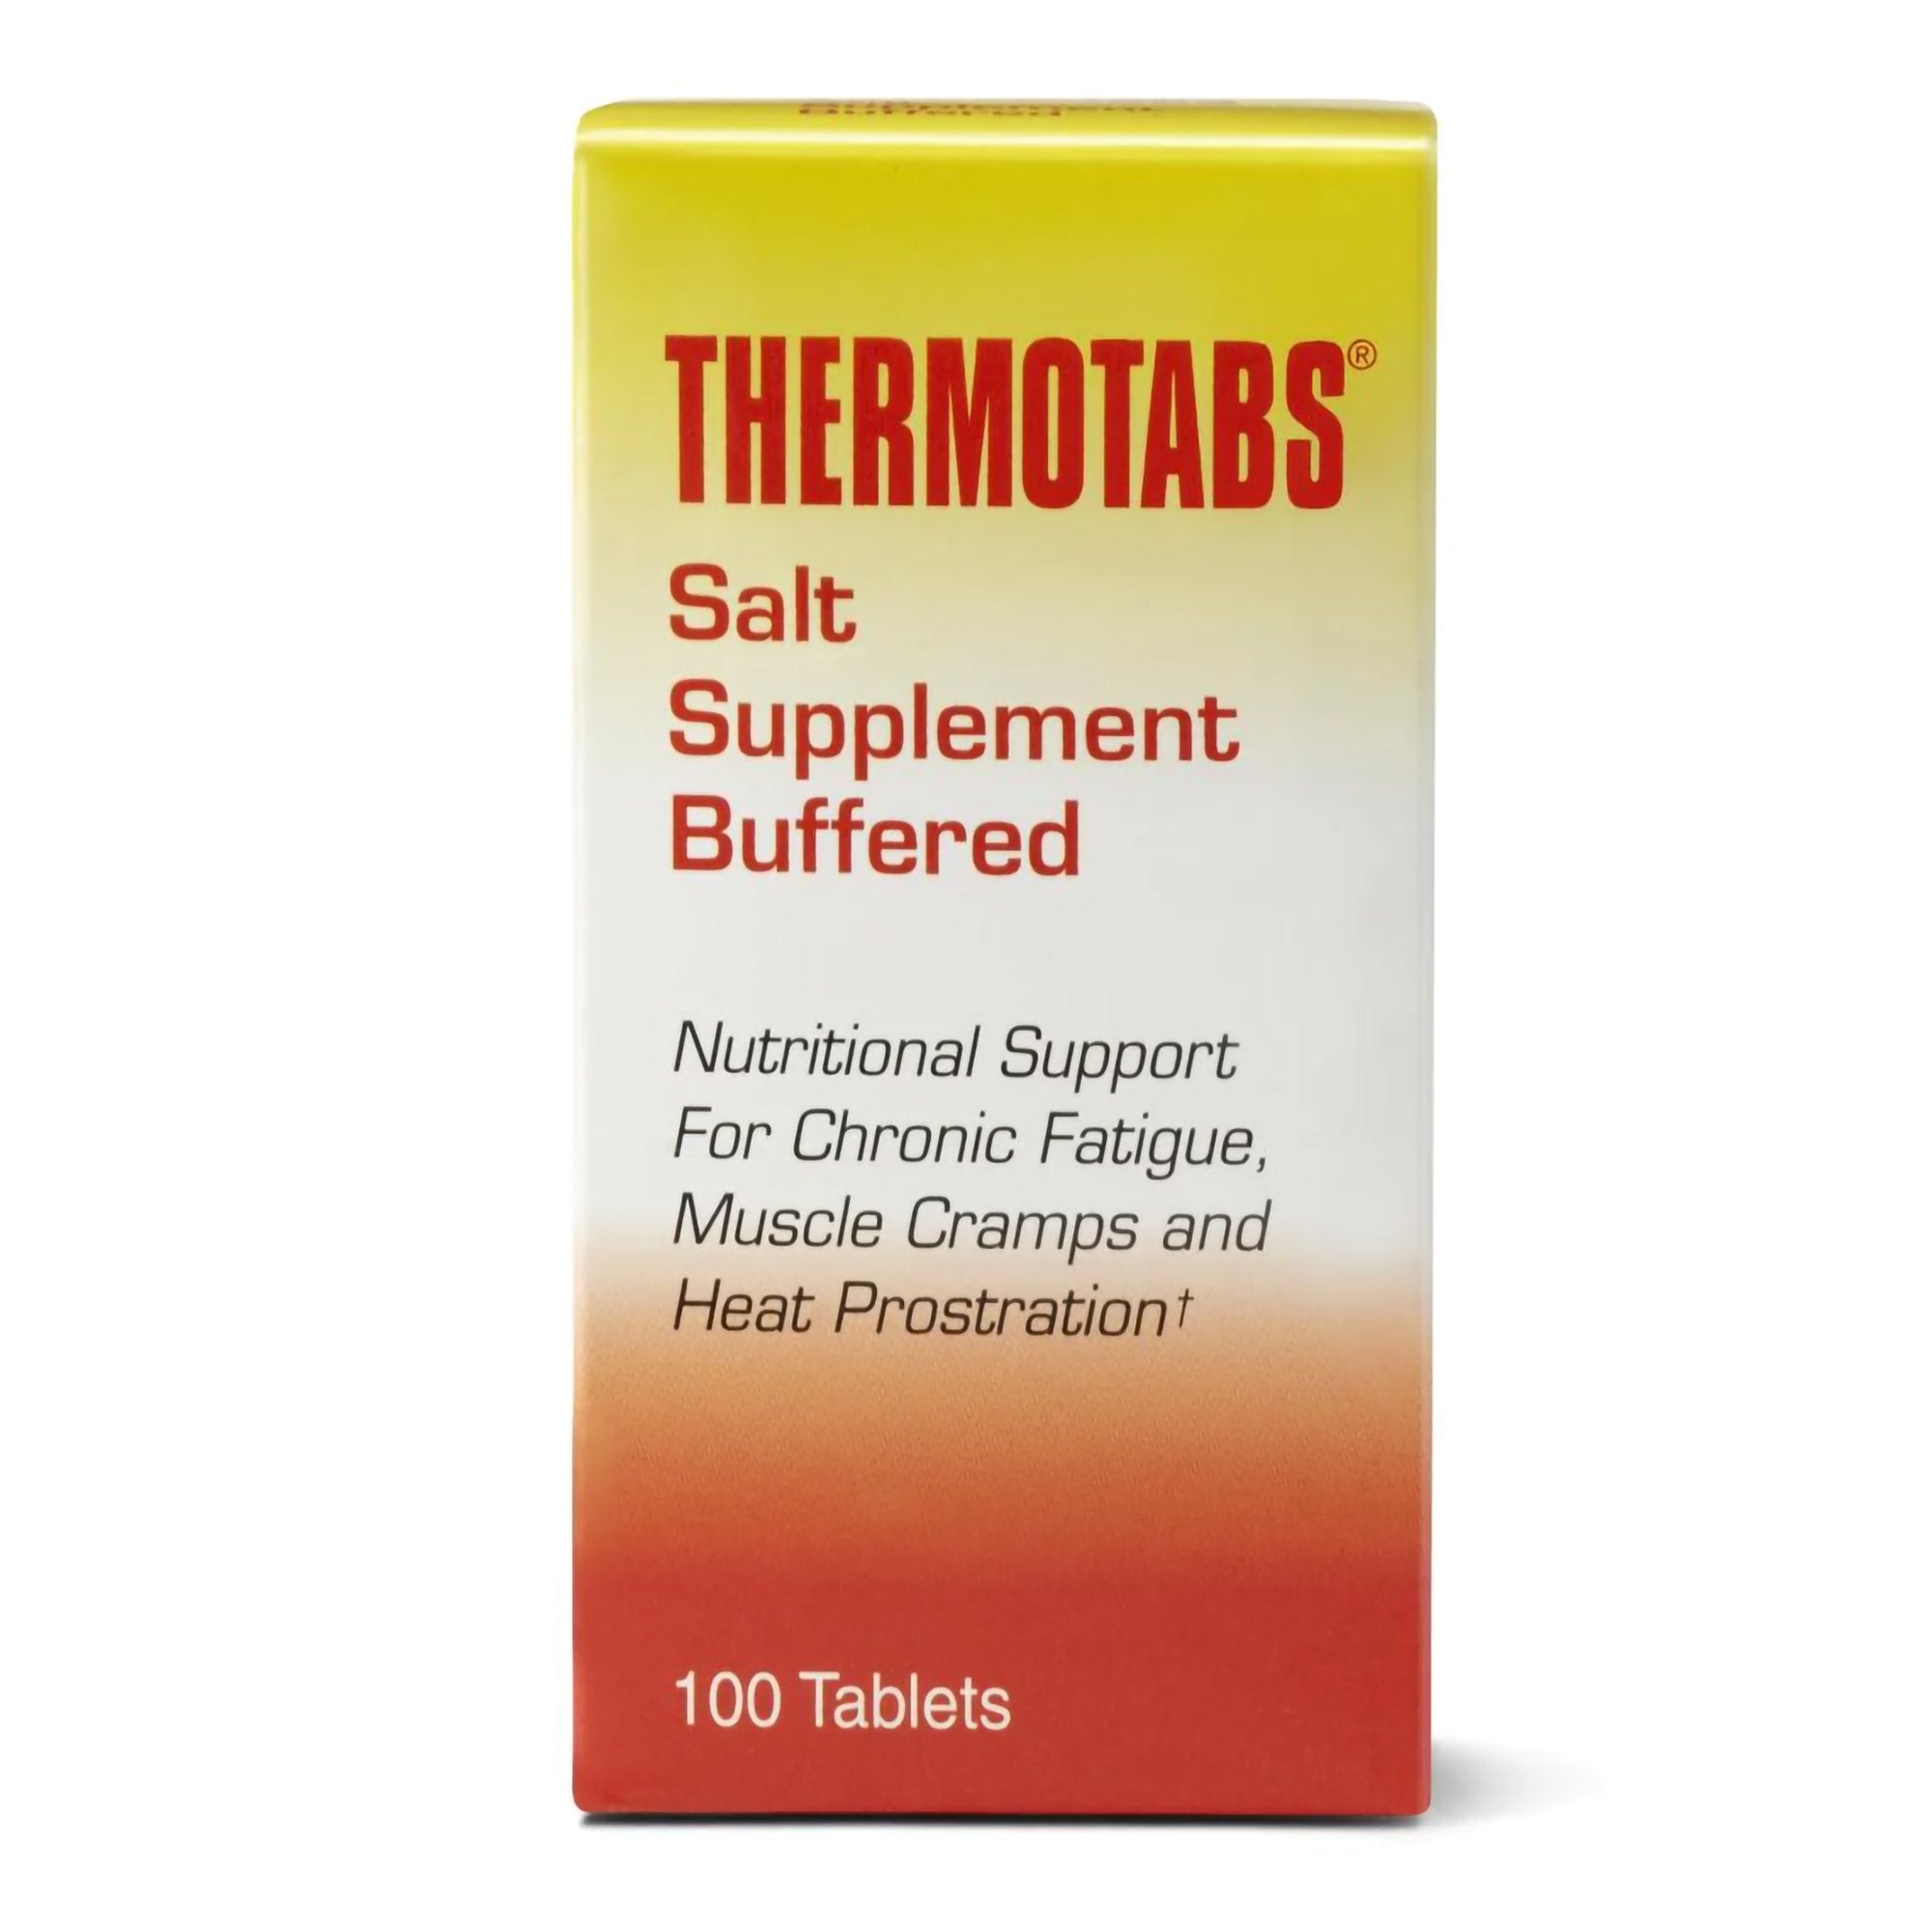 Sodium Chloride Supplement Thermotabs Tablet 100 per Bottle